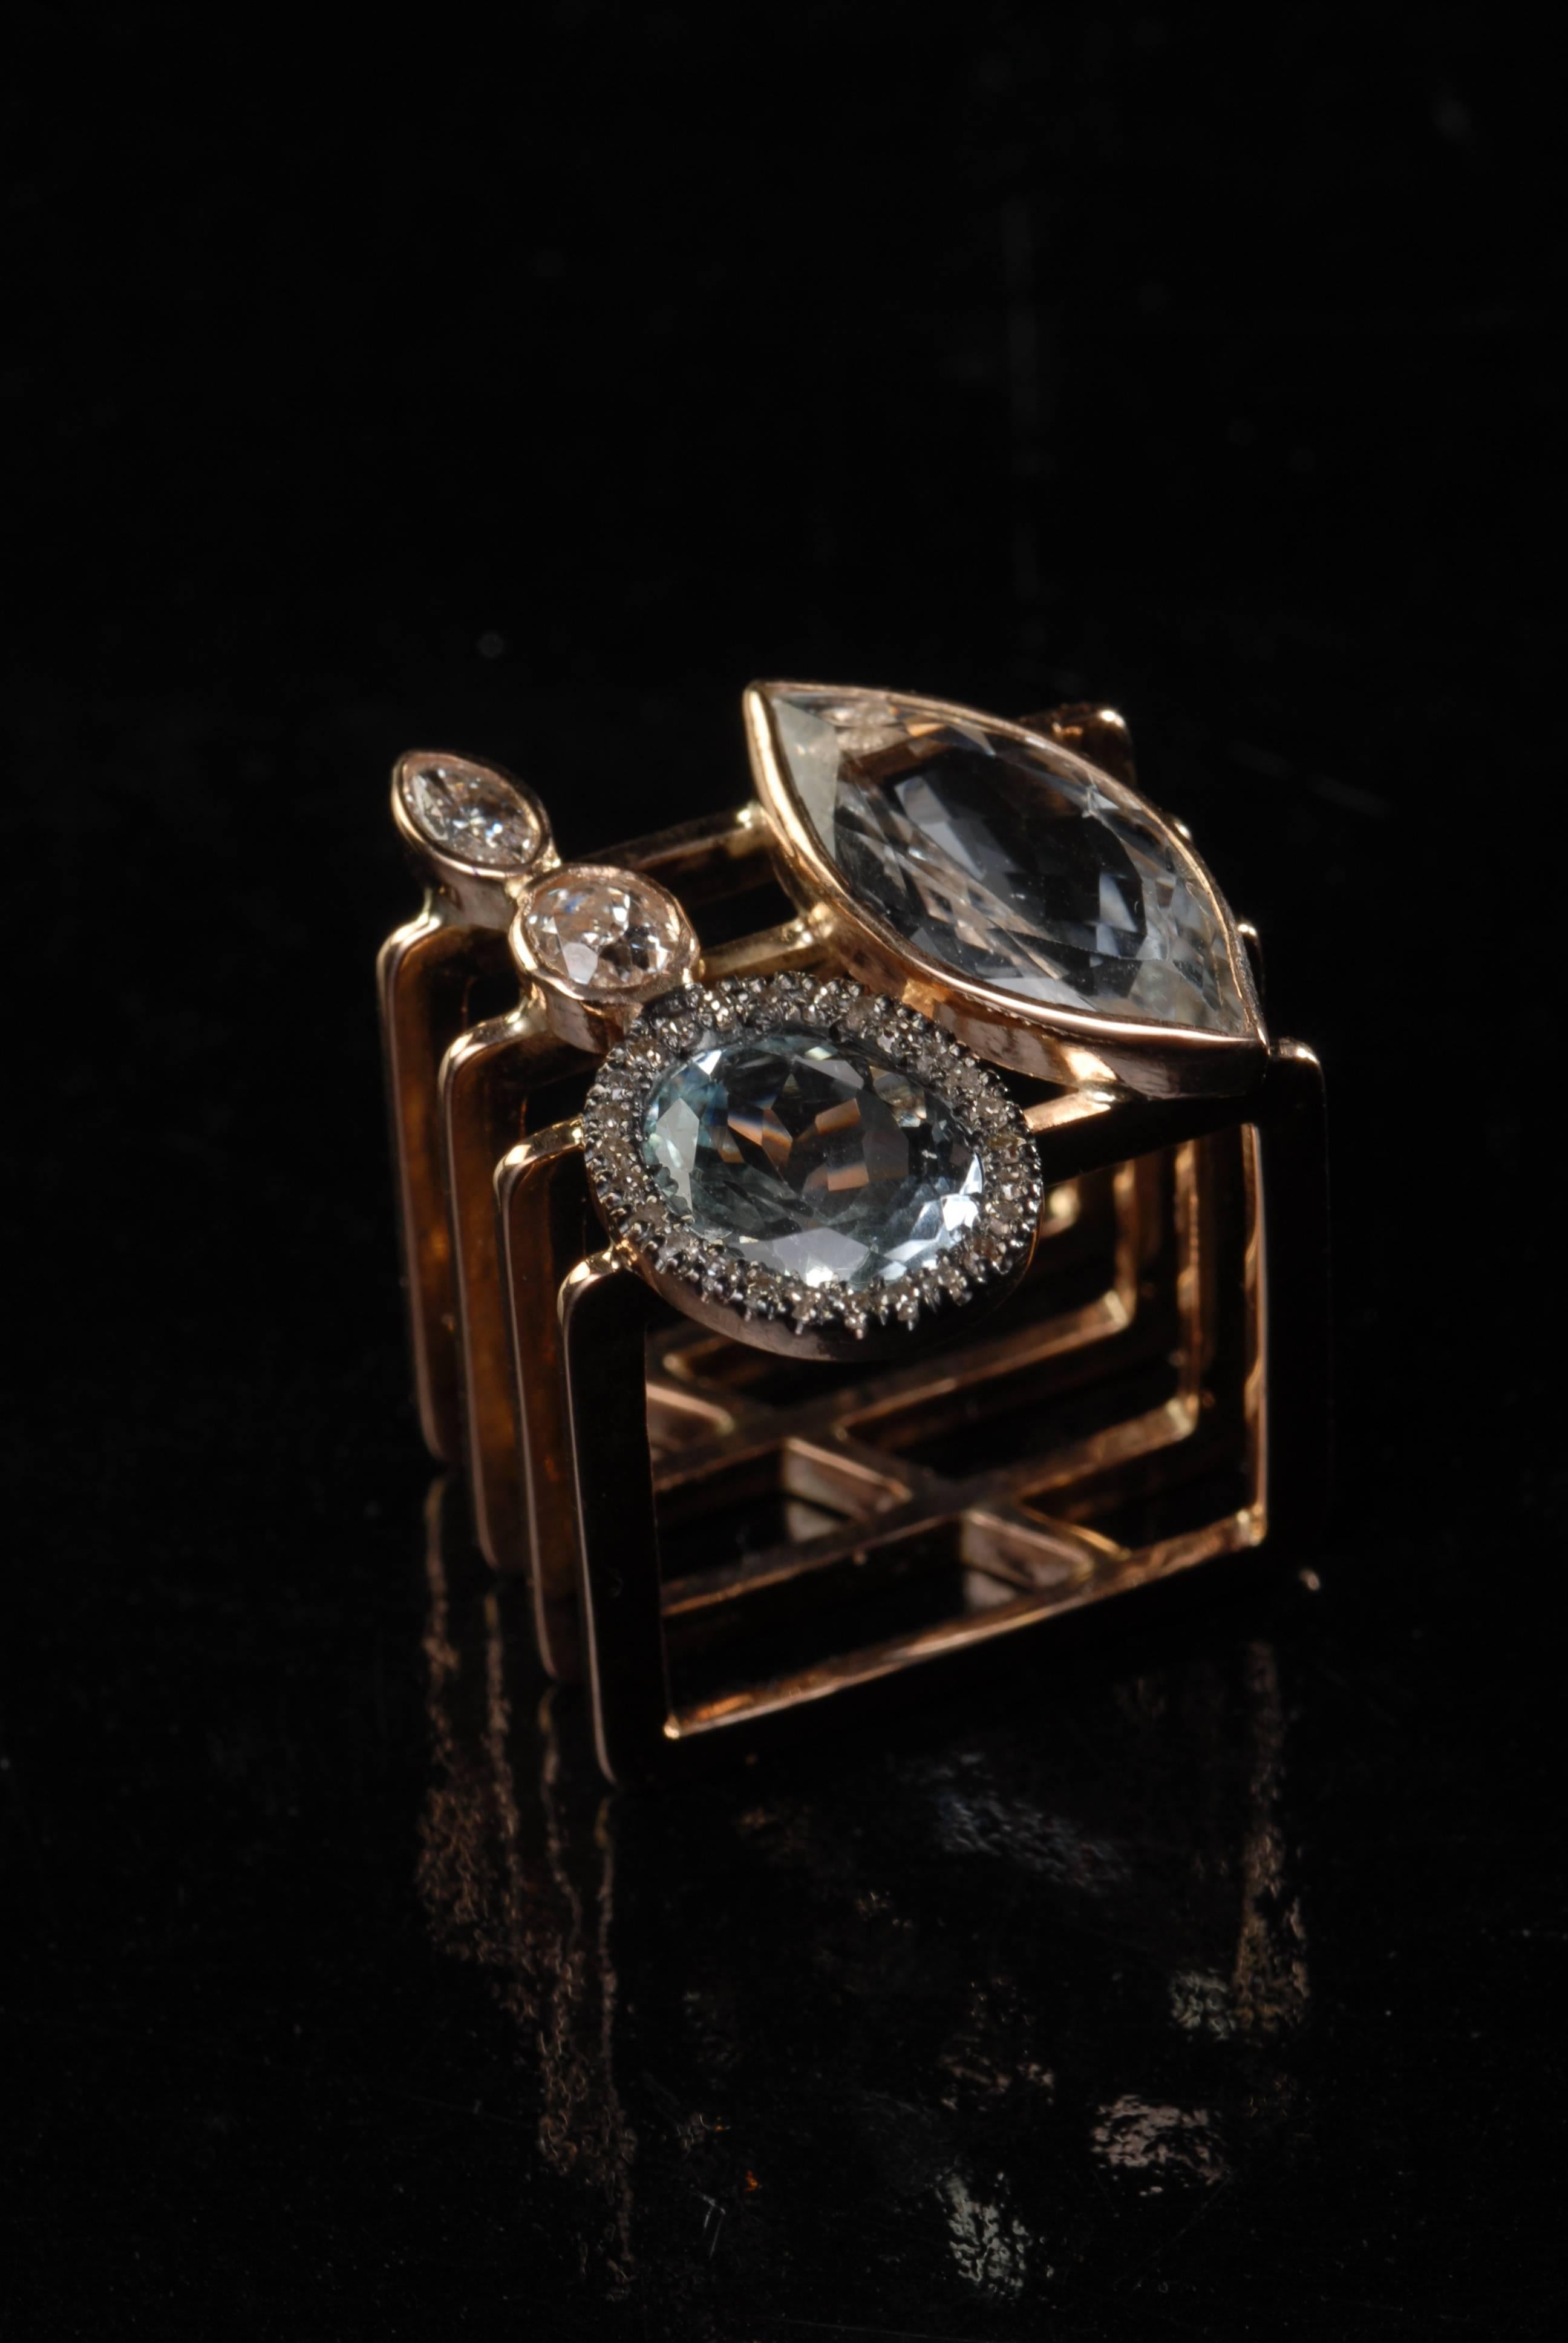 This handmade 14 carat rose-gold rectangular-shaped cocktail ring is made with two beautiful, faceted (marquise and oval)  light-color aquamarines and faceted, different-shape diamonds. 

Ring size US 7/UK N 

